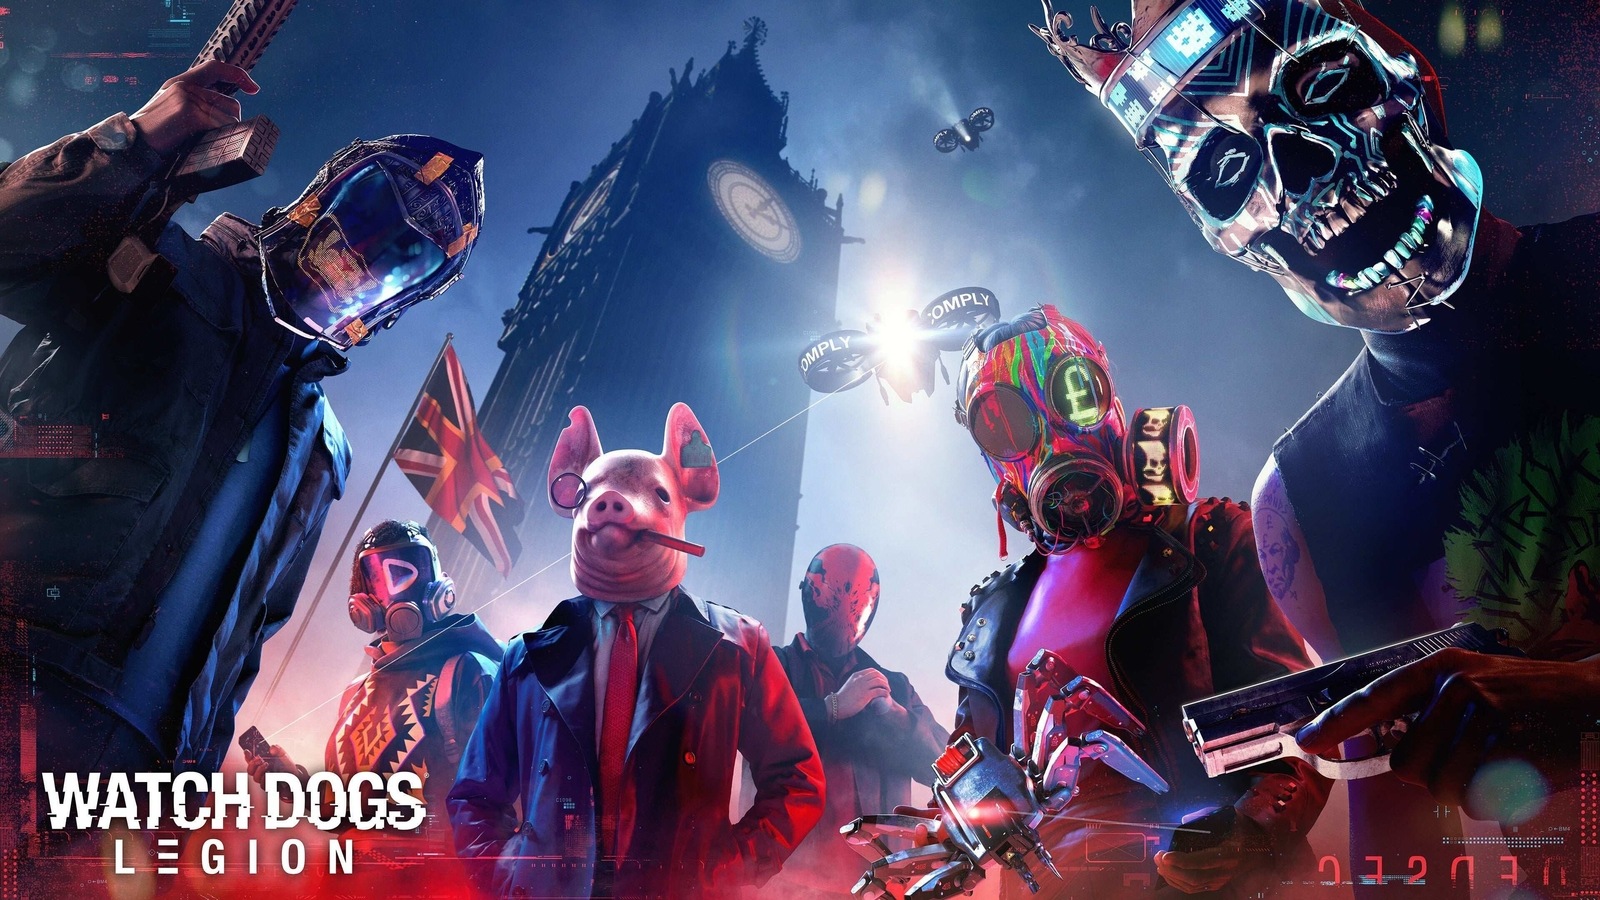 Watch Dogs Legion multiplayer release date